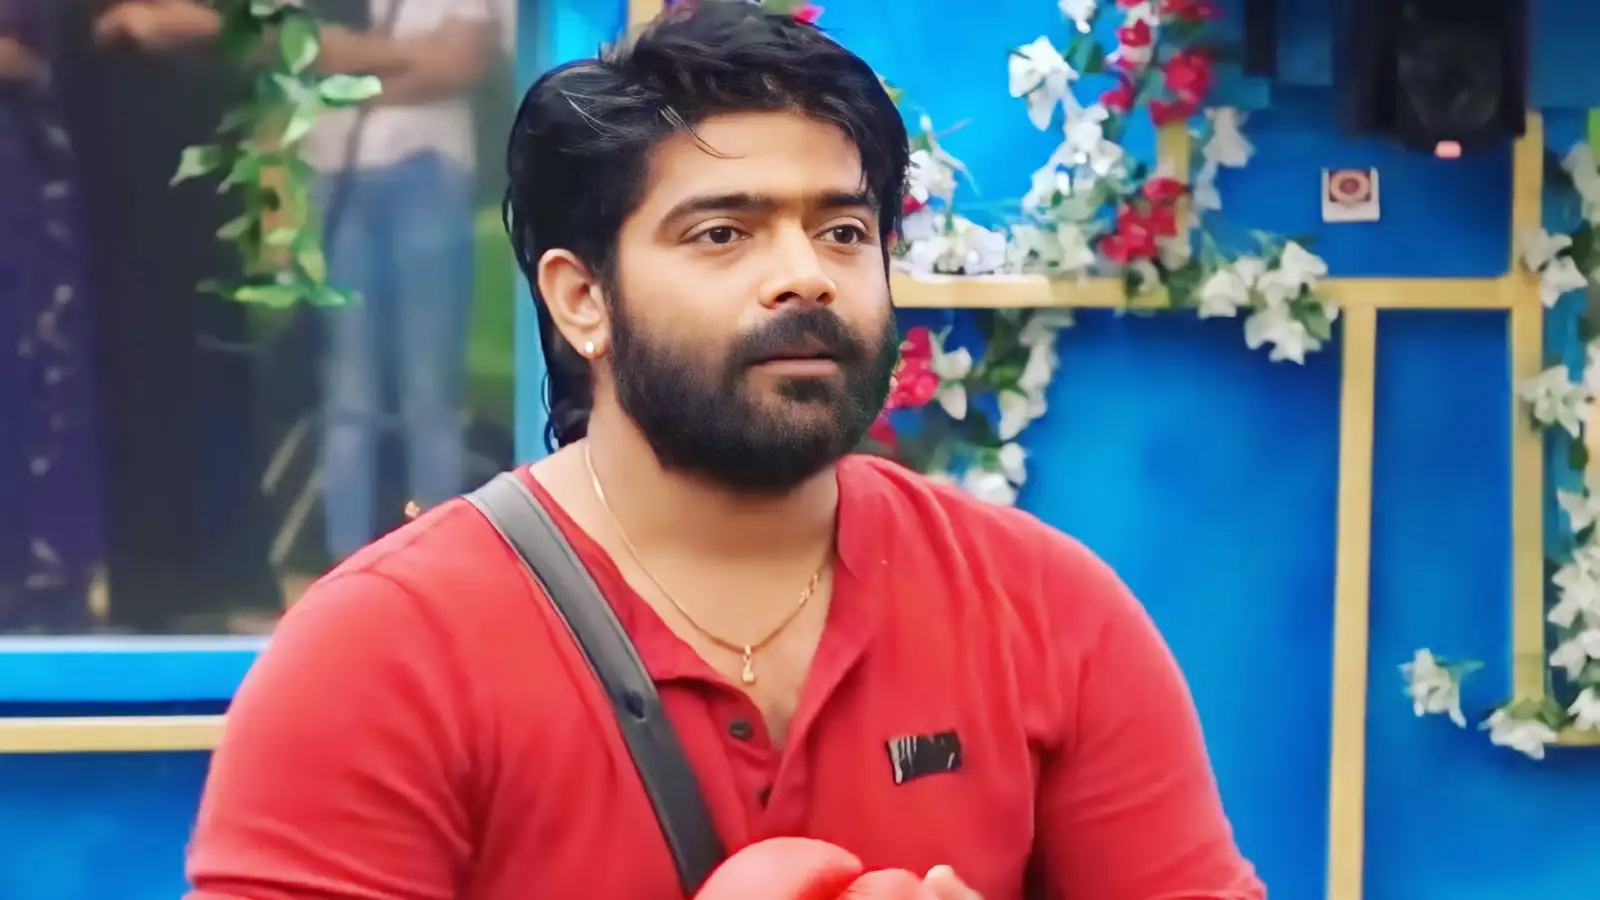 Apart from the captain, Revanth's weakness is the target of the housemates